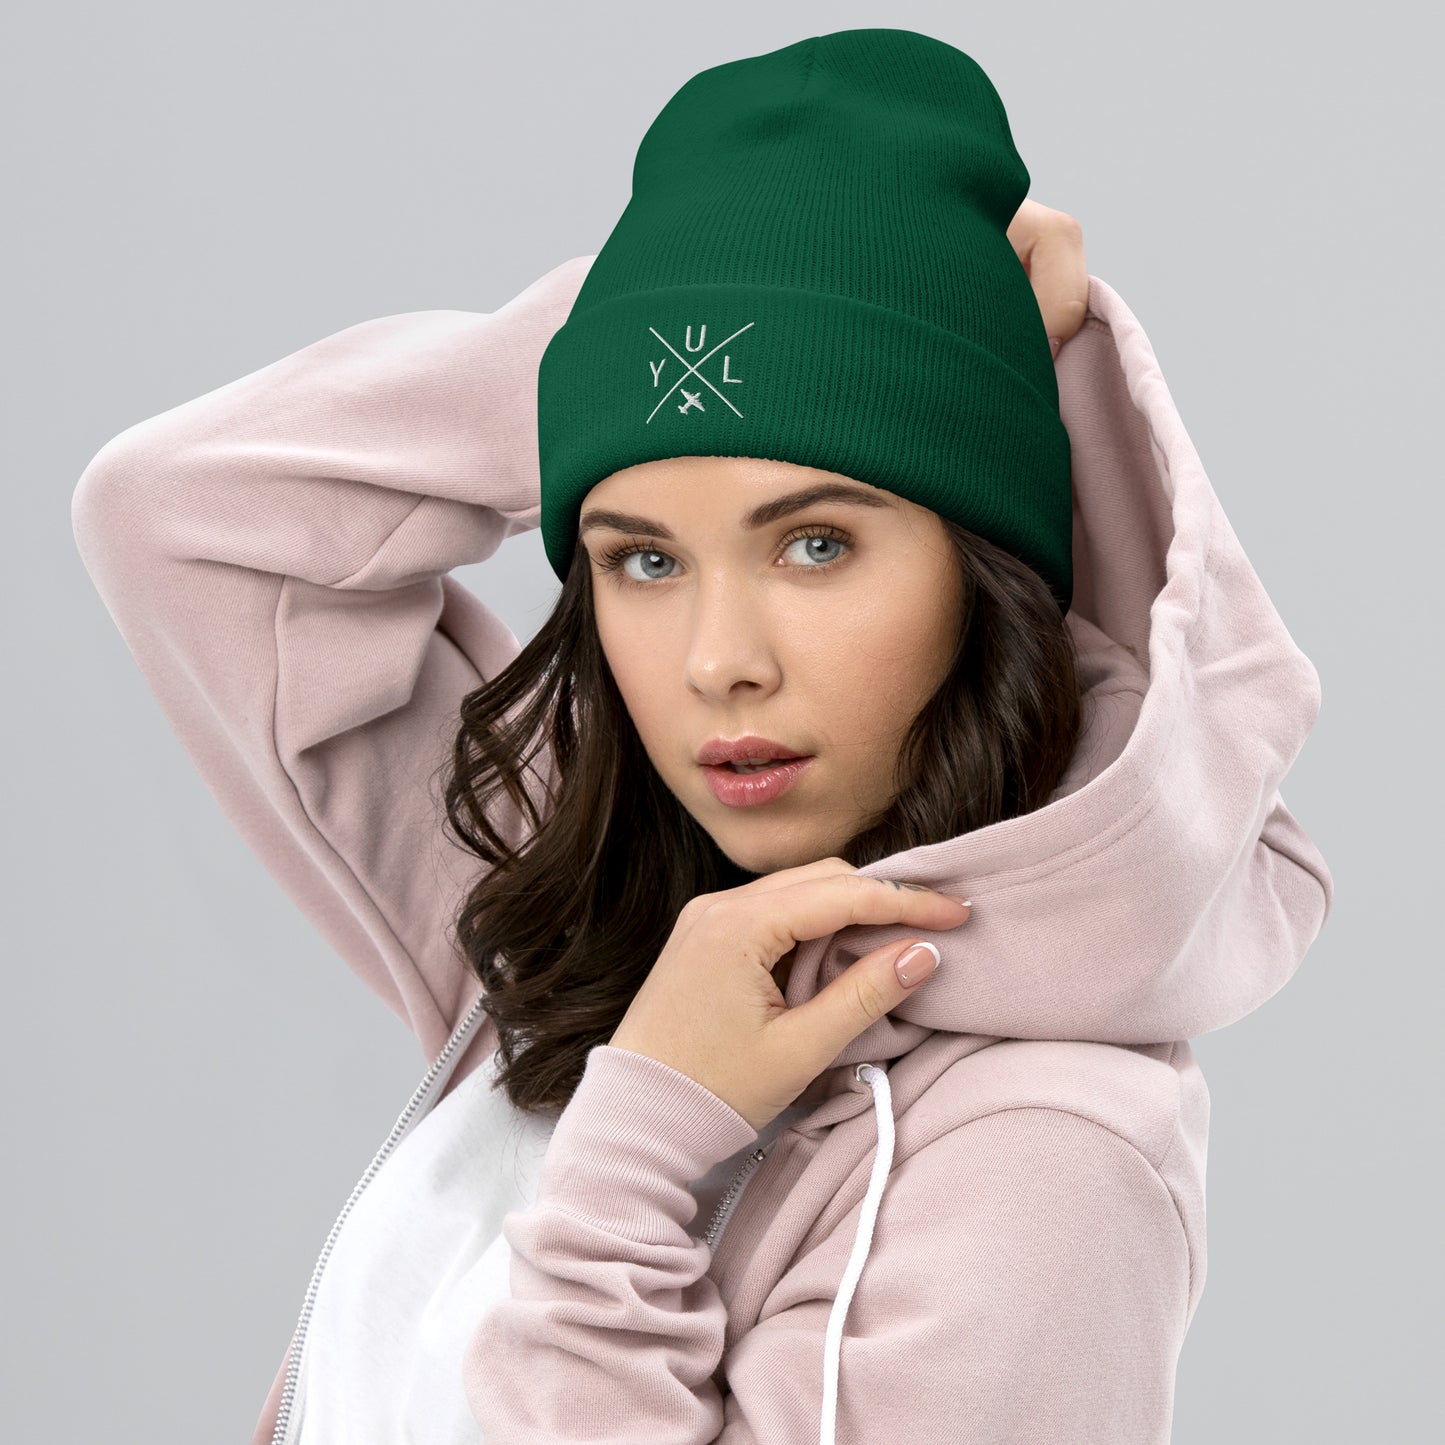 Crossed-X Cuffed Beanie - White • YUL Montreal • YHM Designs - Image 05